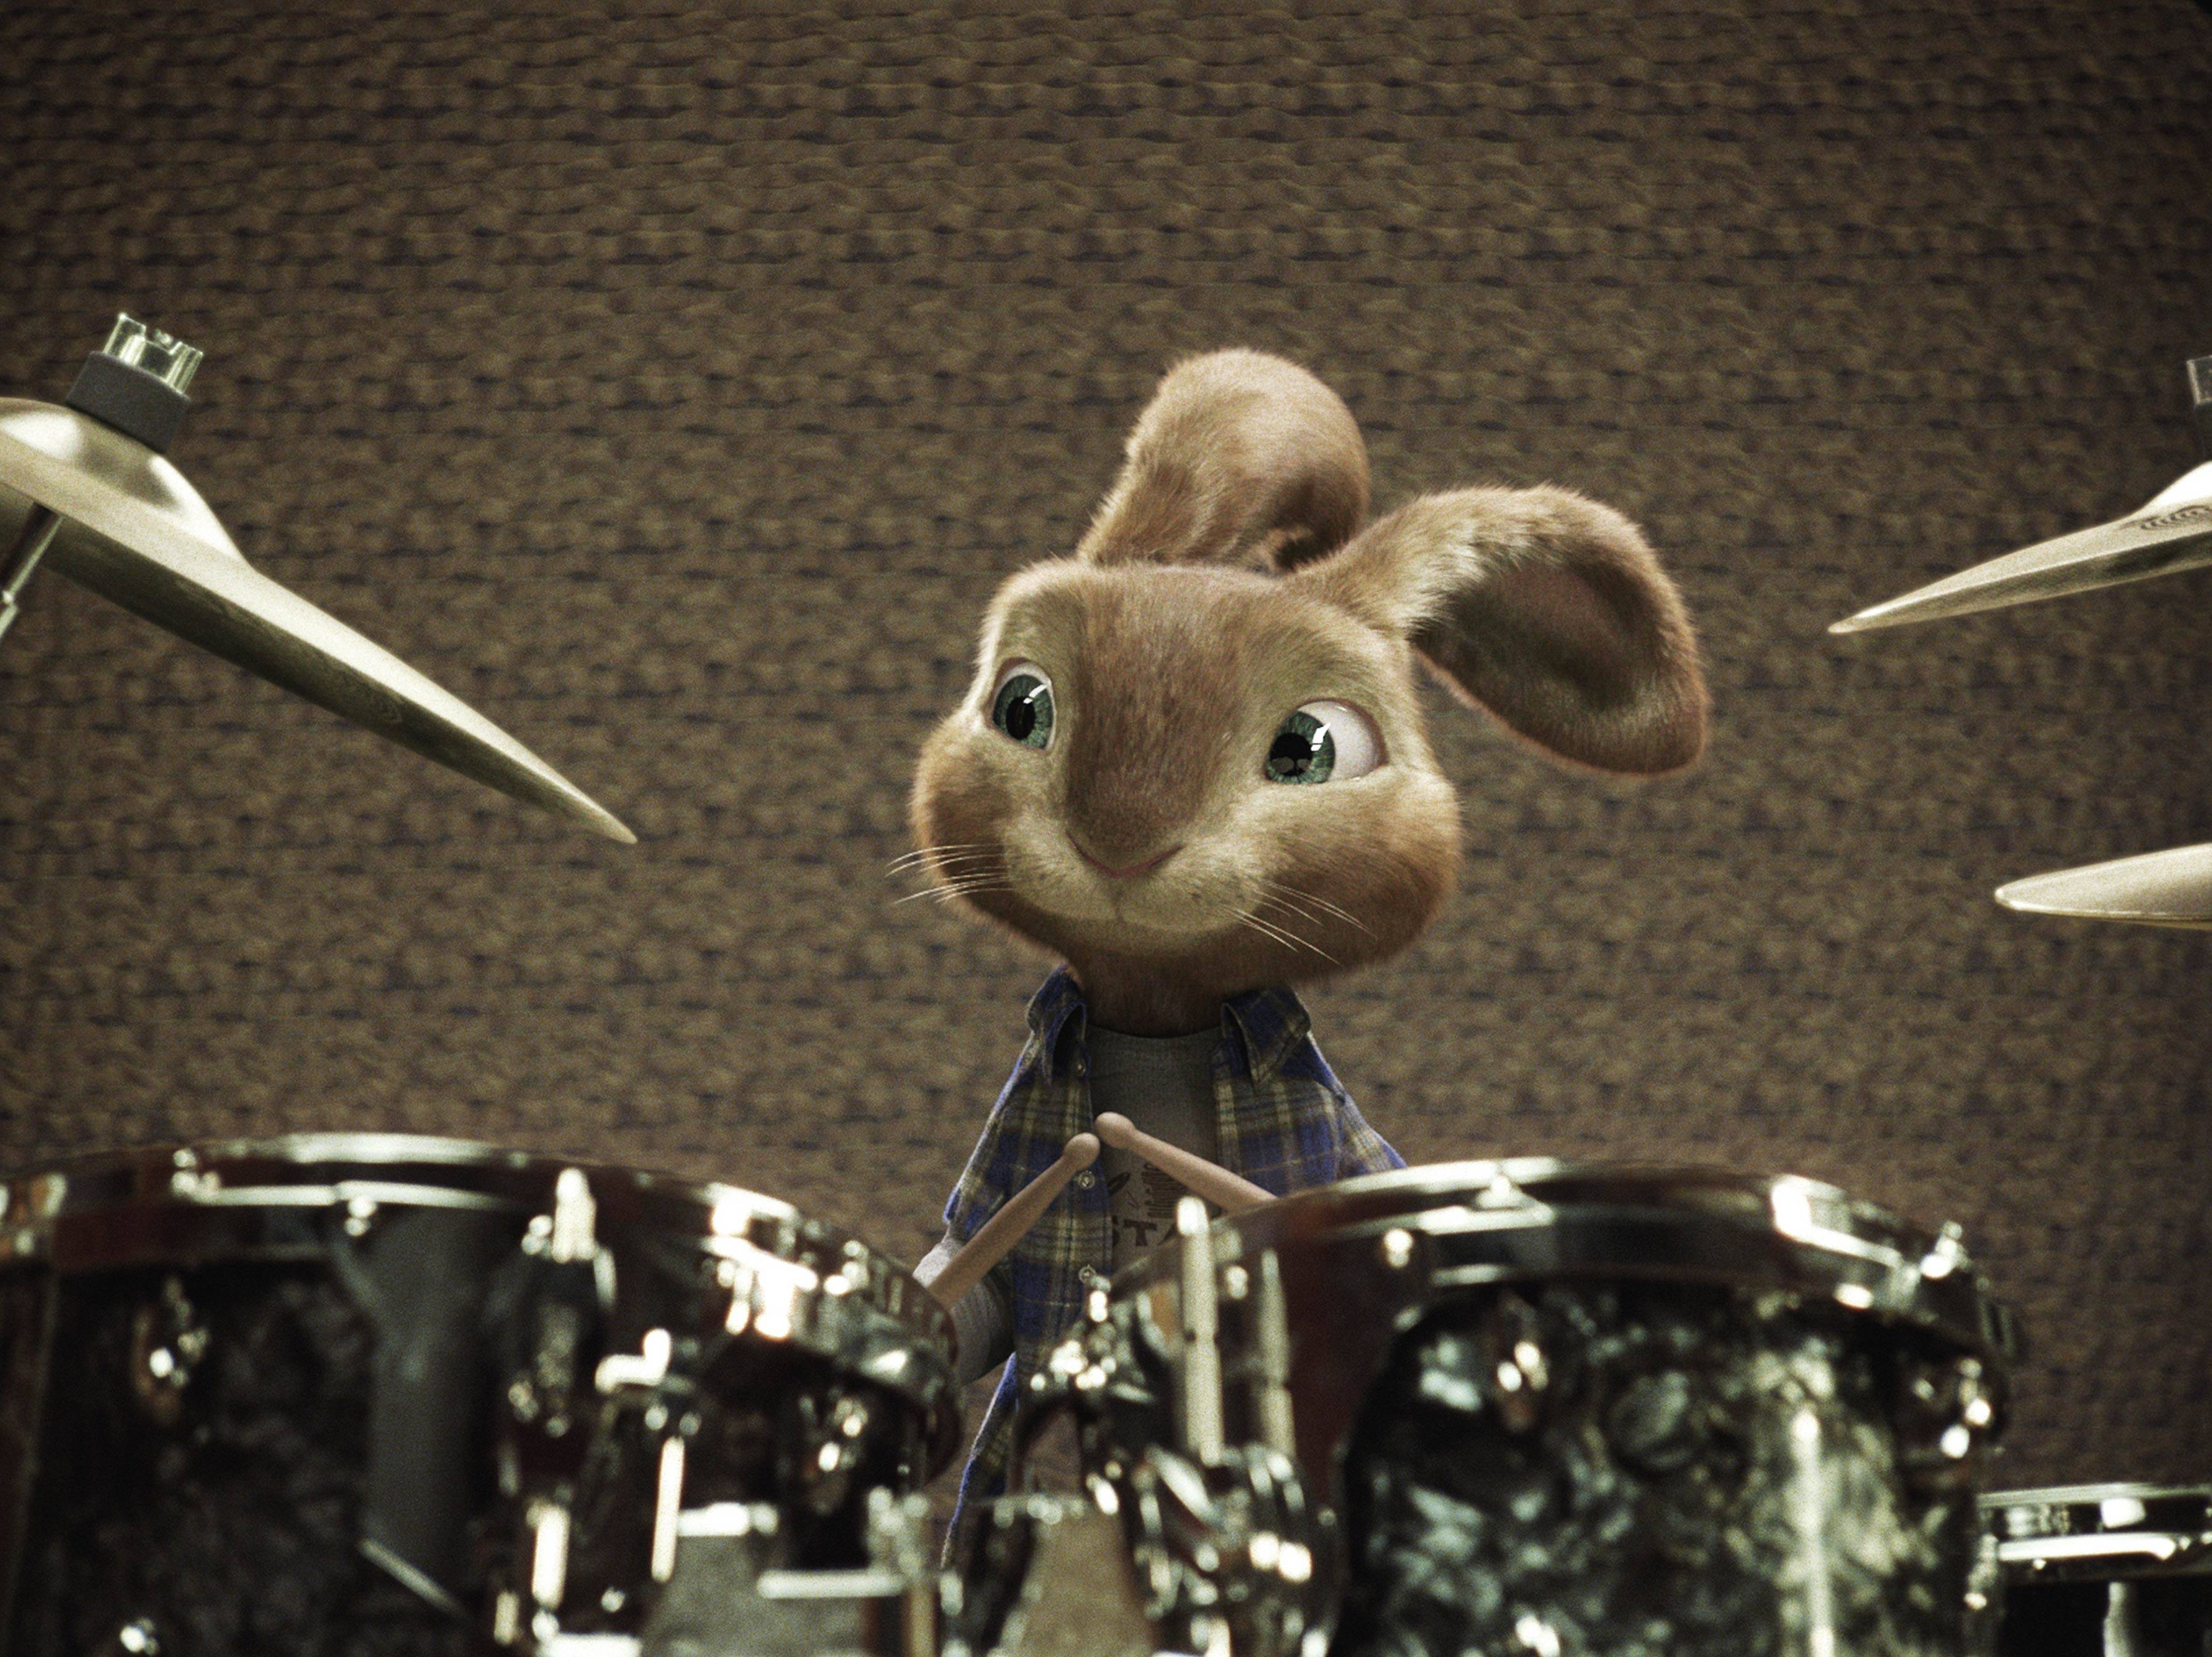 EB at the Drums from Hop Desktop Wallpaper